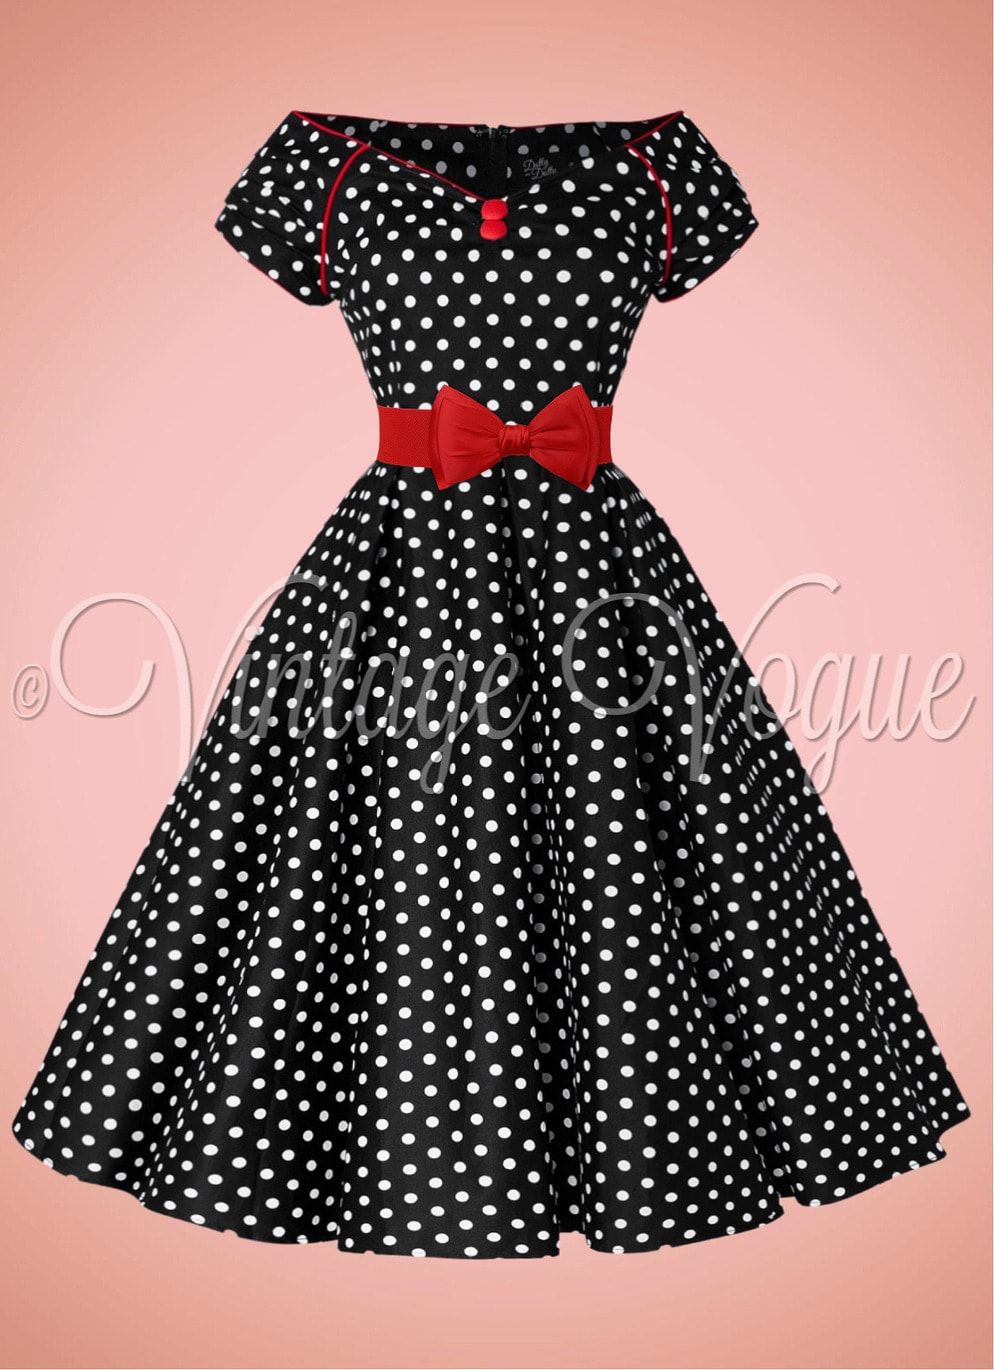 Dolly and Dotty 50's Retro Rockabilly Swing Kleid Lily Polka Dot Punkte Dress in Schwarz Lily Off Shoulder Swing Dress in Black White Dots with Red Details V873-30